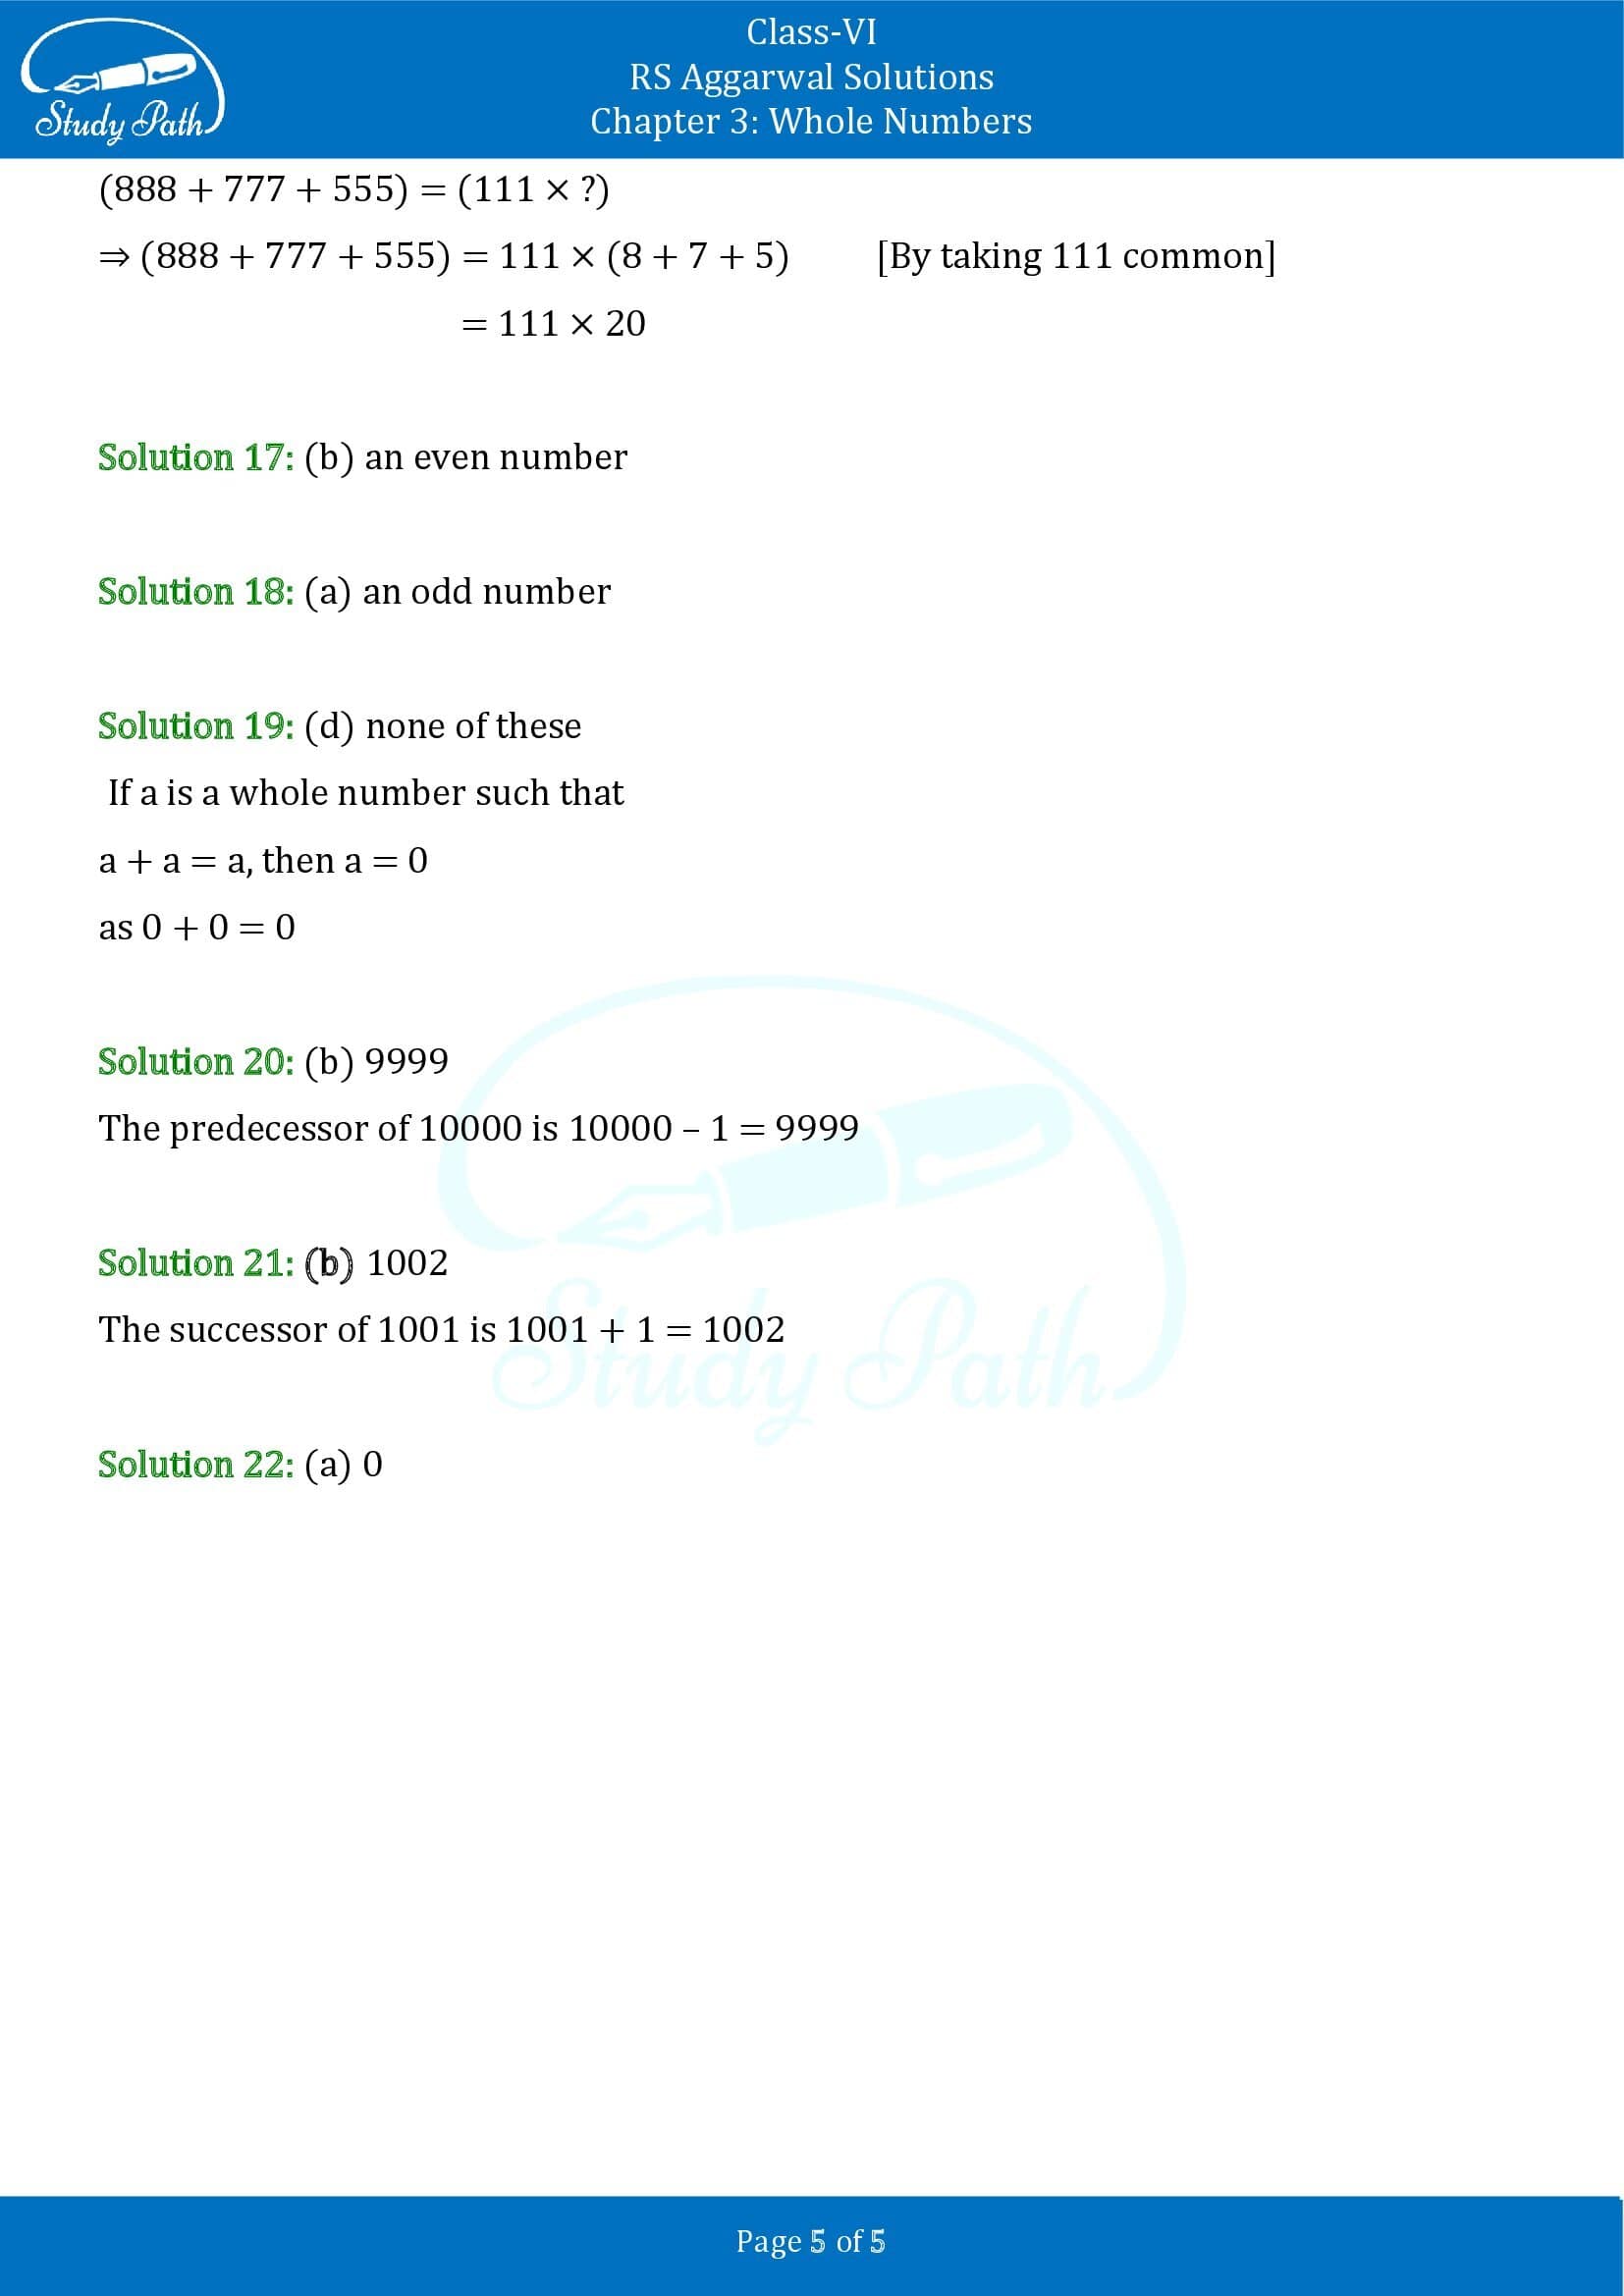 RS Aggarwal Solutions Class 6 Chapter 3 Whole Numbers Exercise 3F MCQ 00005